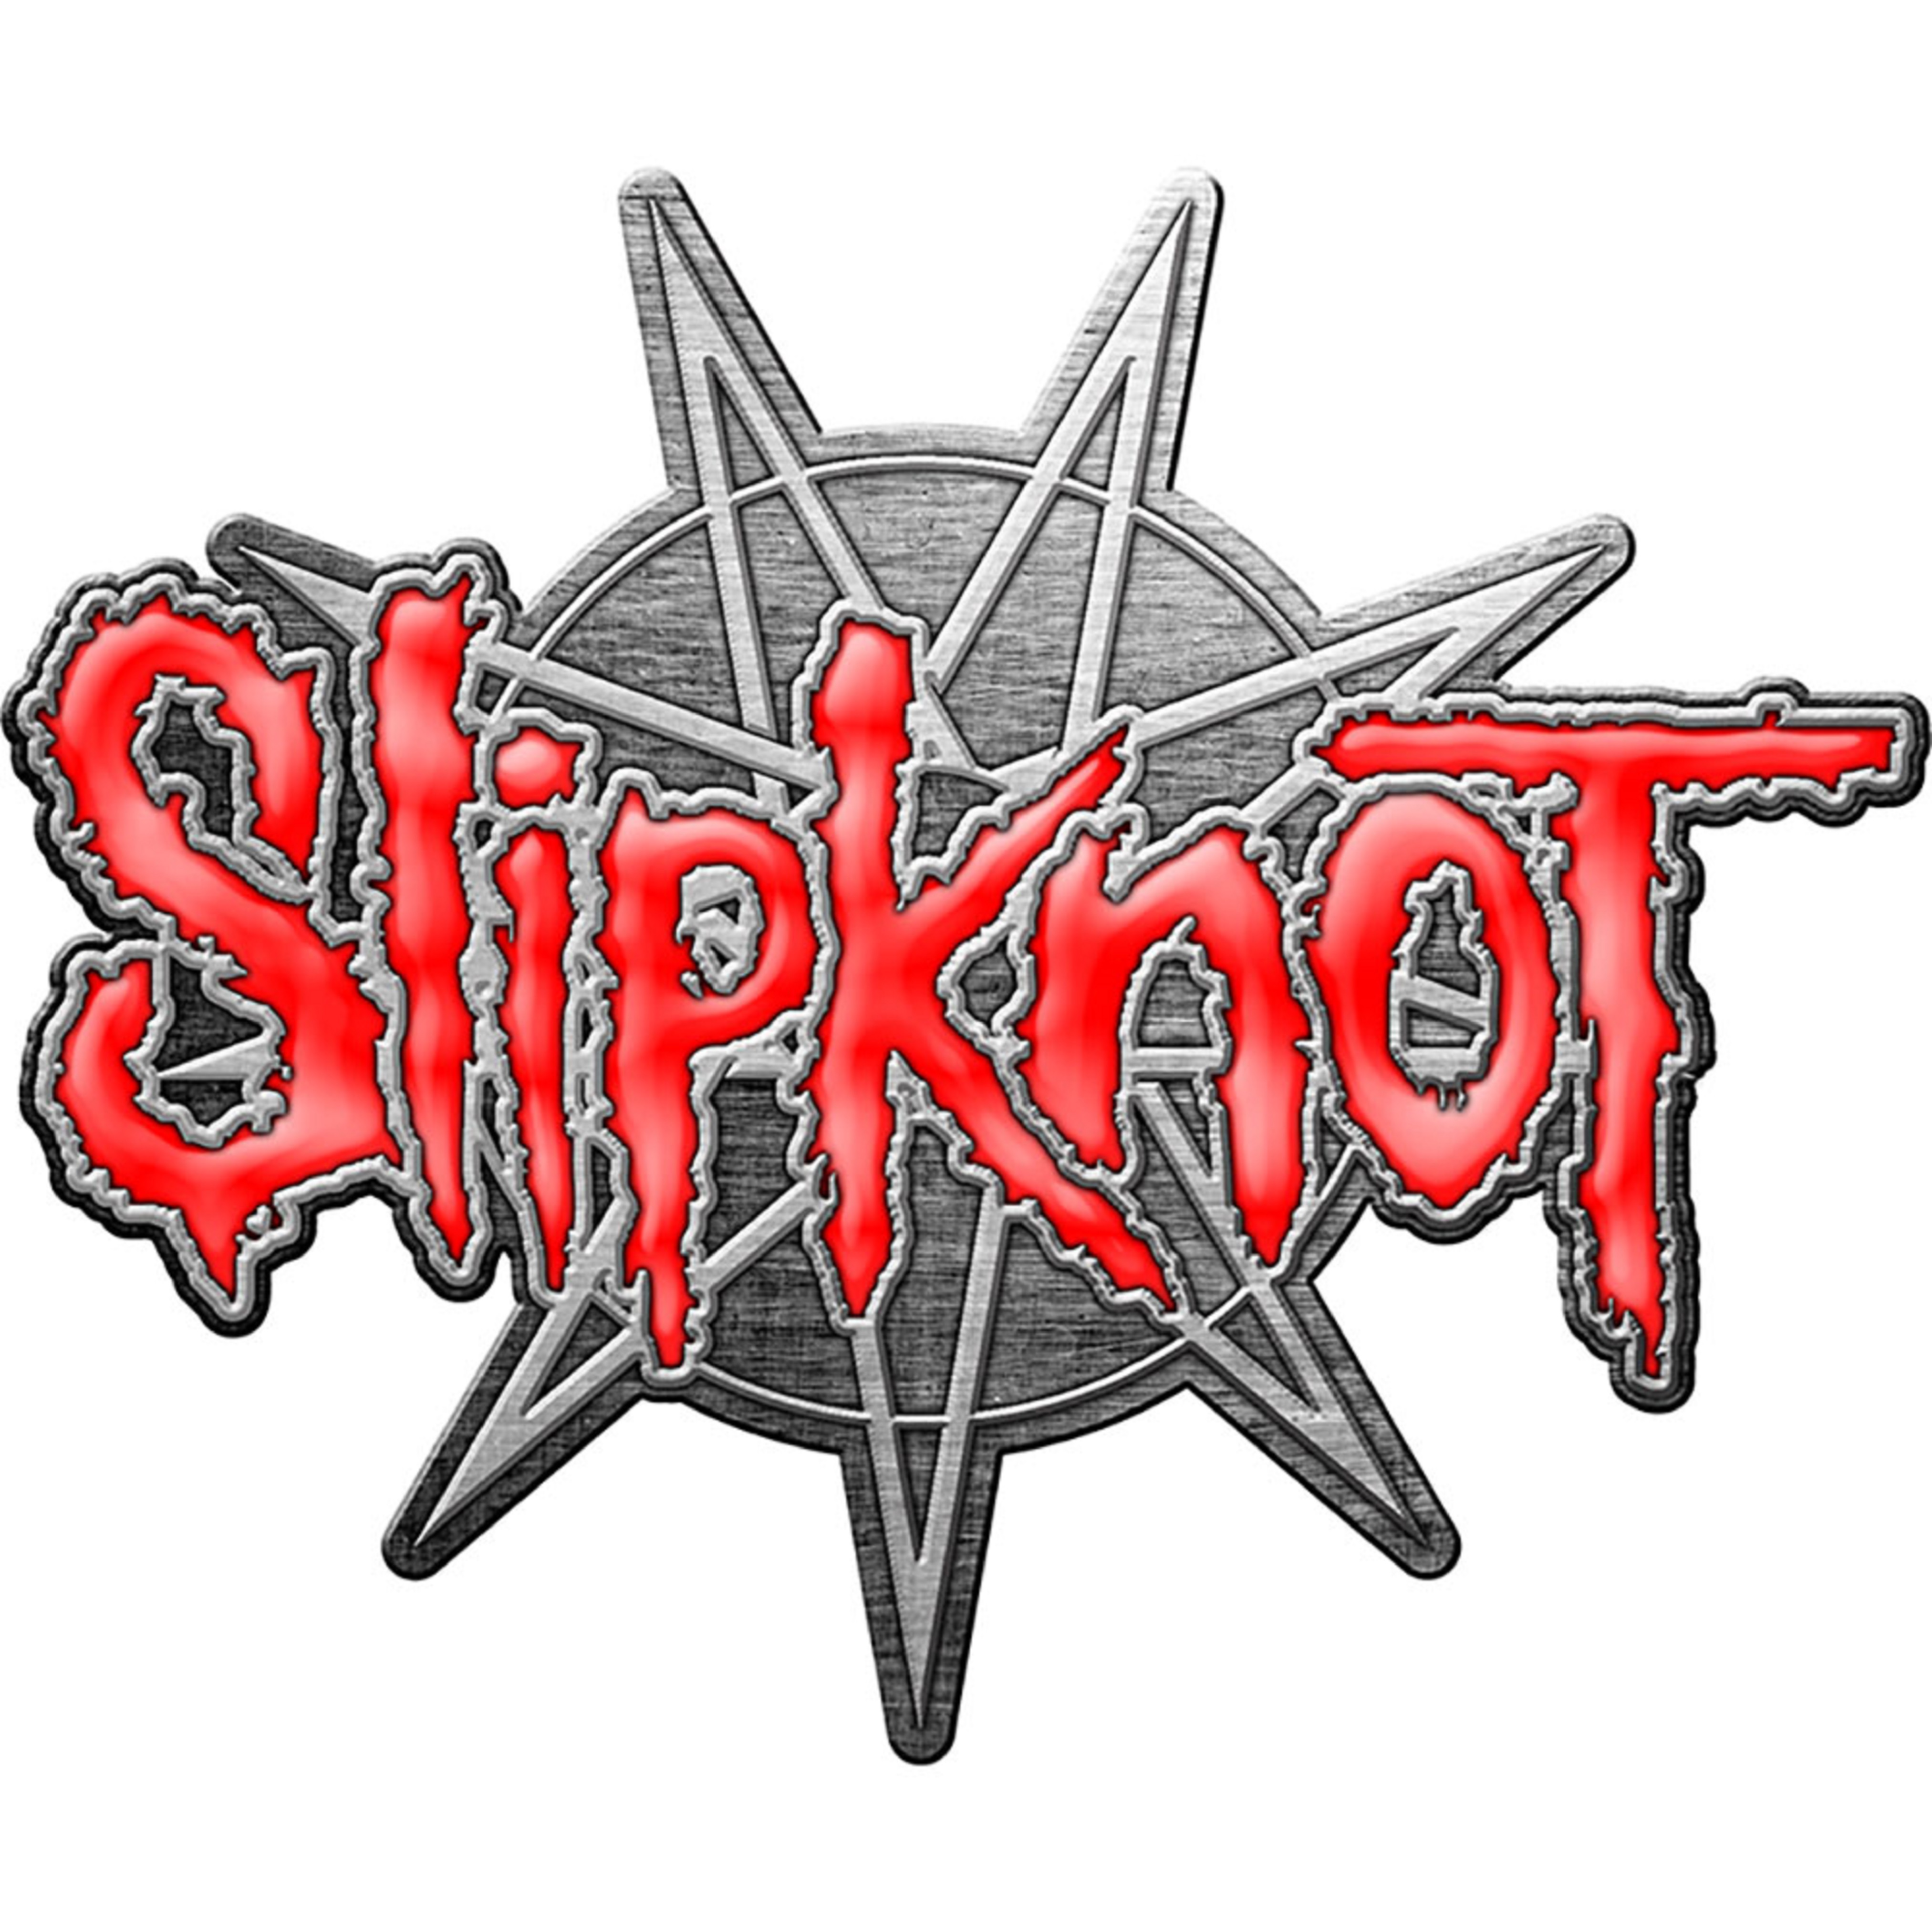 Patch - Slipknot - 9 pointed star | Rock Off